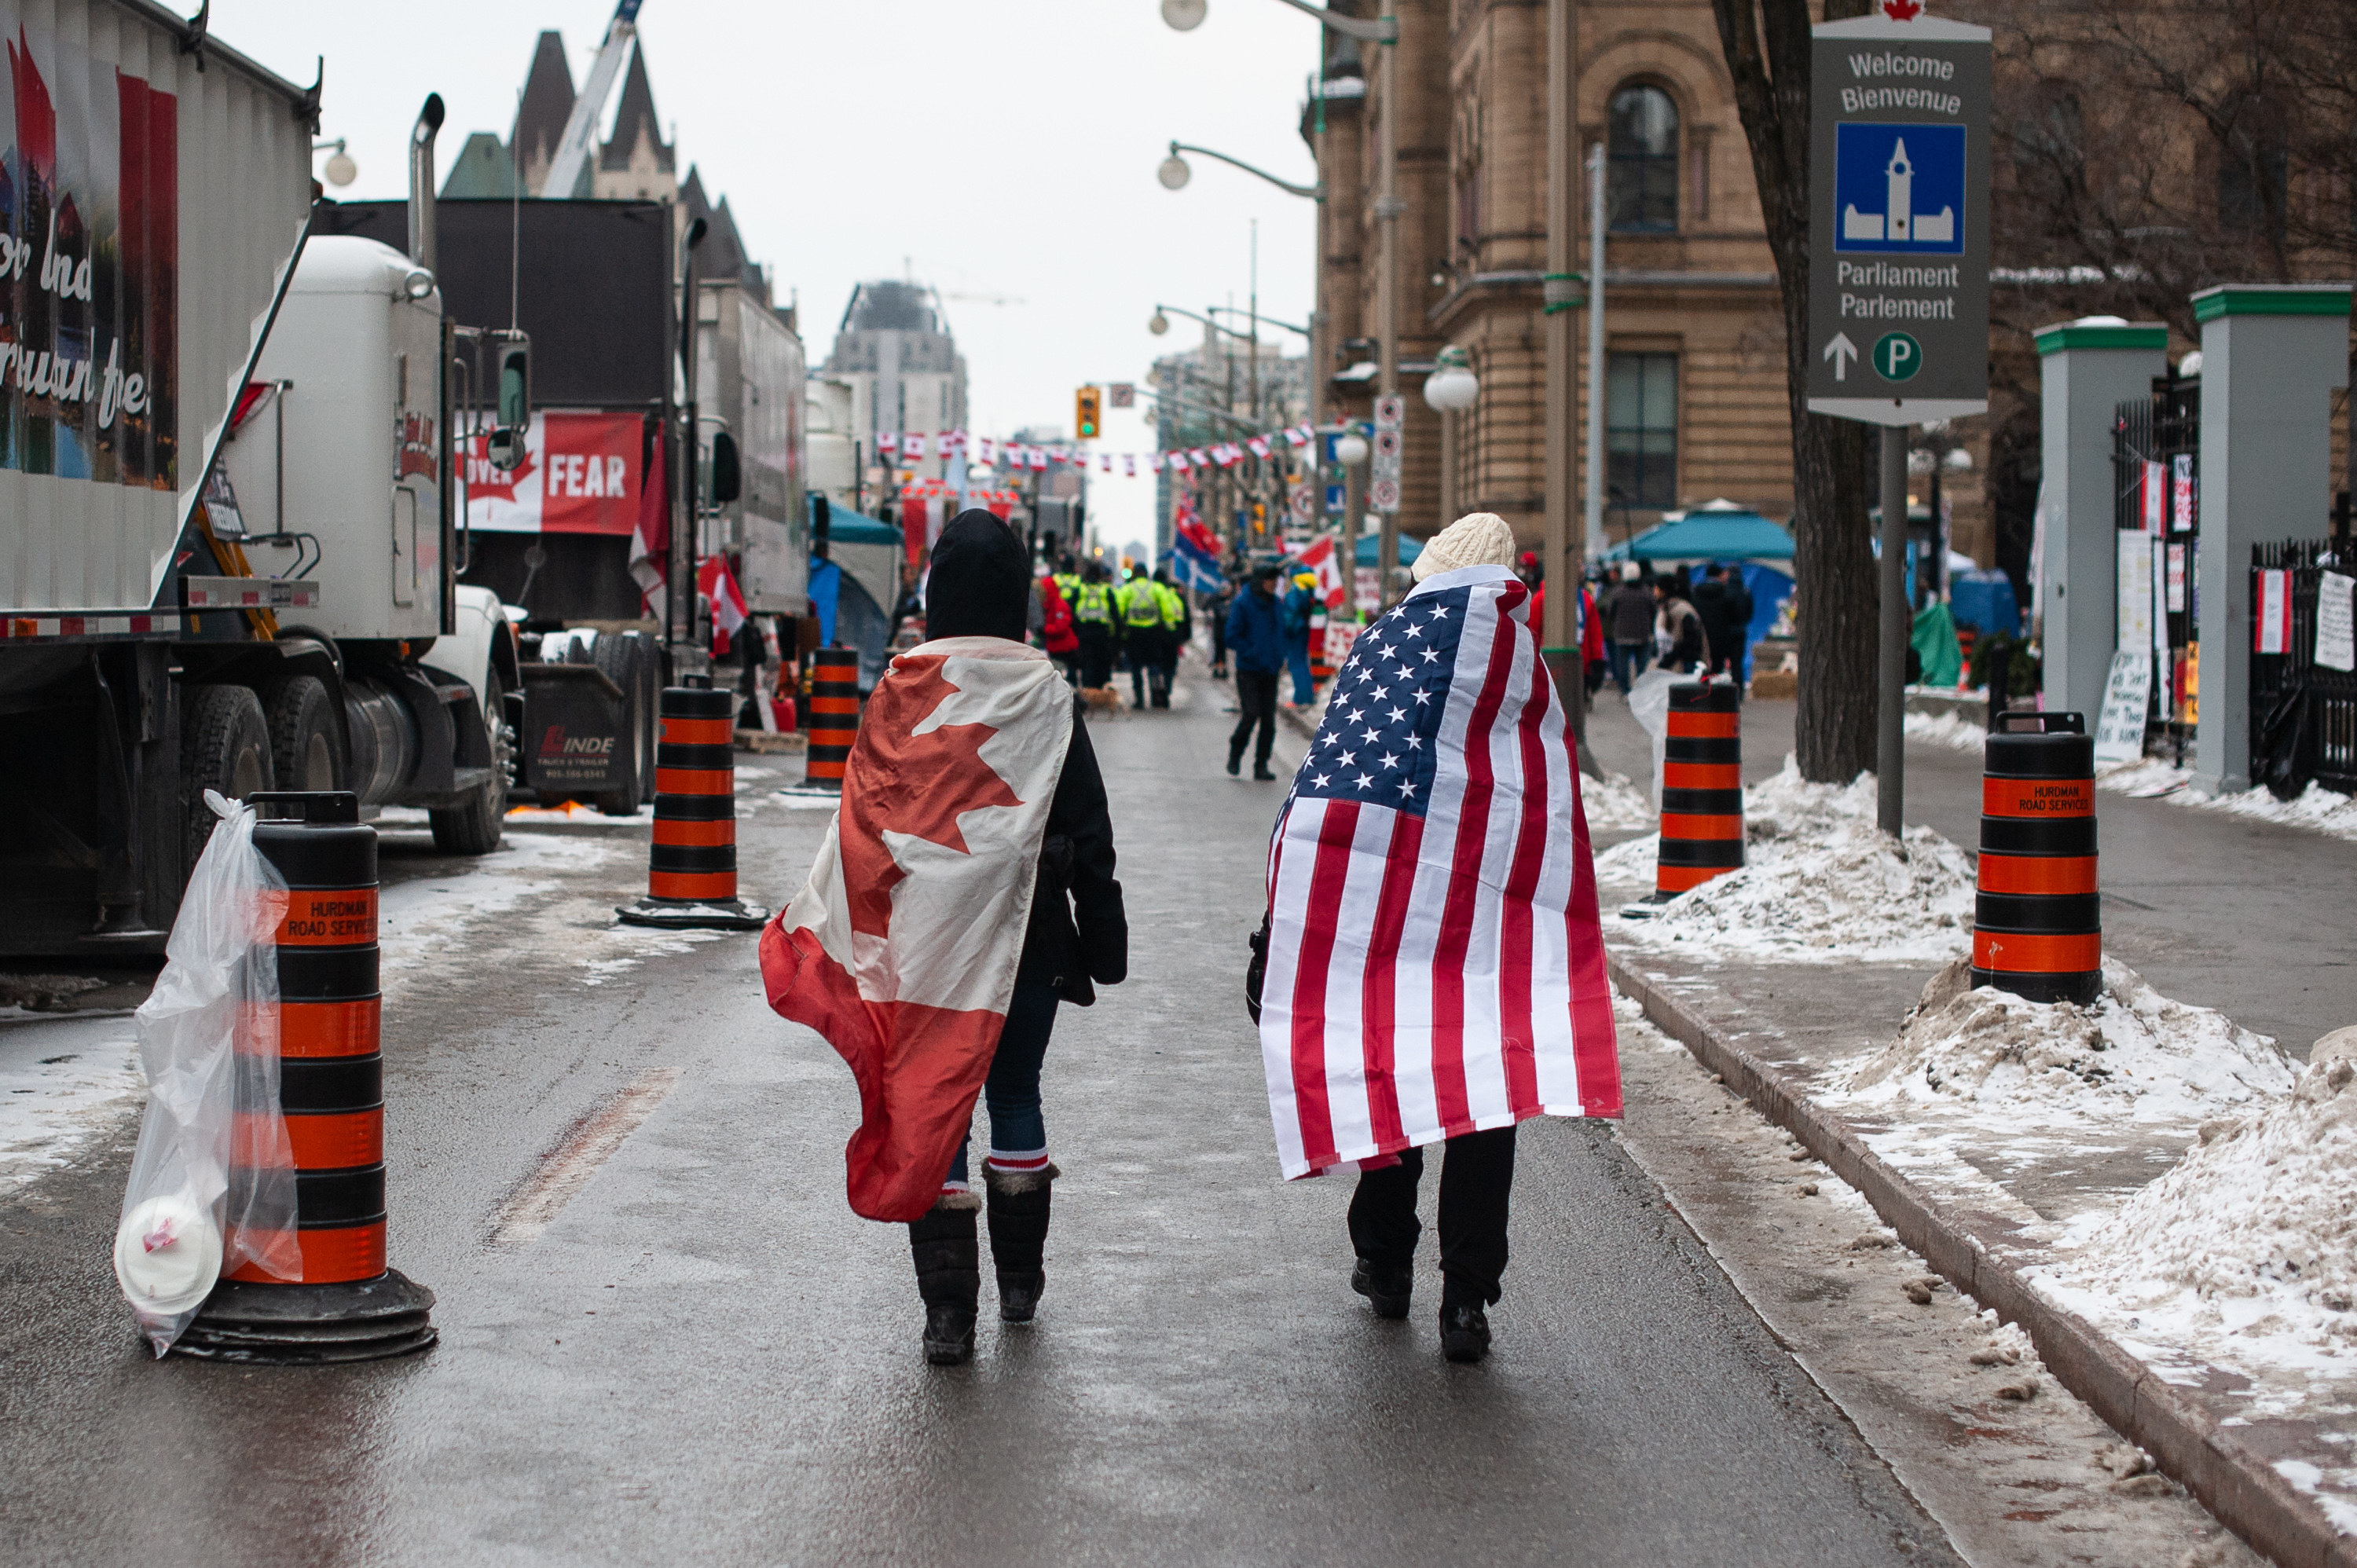 Two people walk with the Canadian and American flags draped across their backs